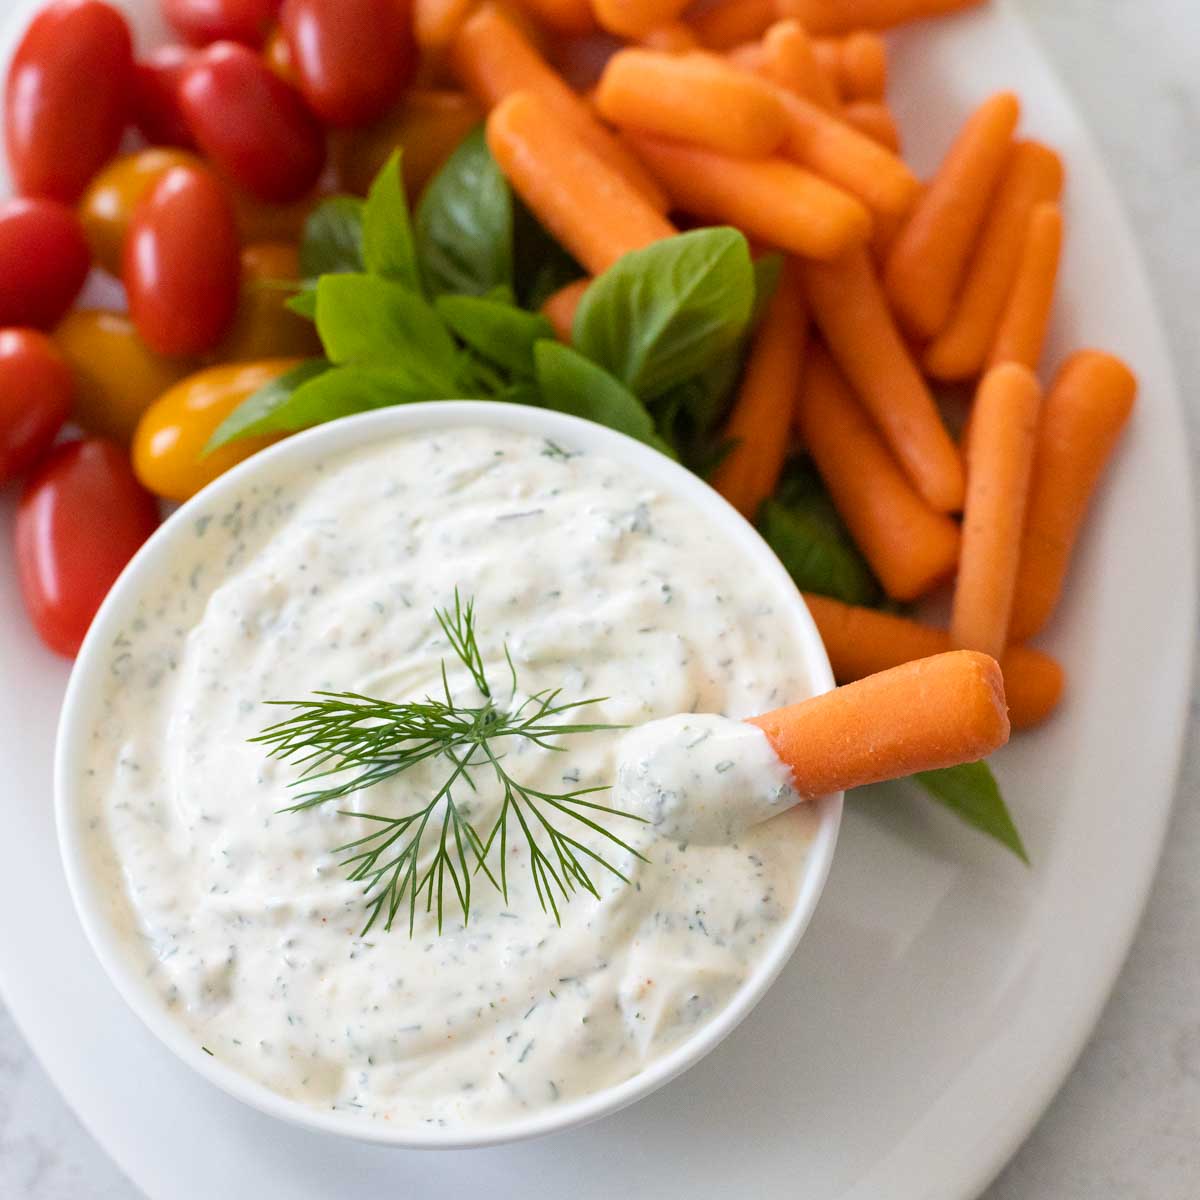 A bowl of dill dip has a baby carrot dipping in it. Cherry tomatoes and fresh herbs are on the platter behind it.